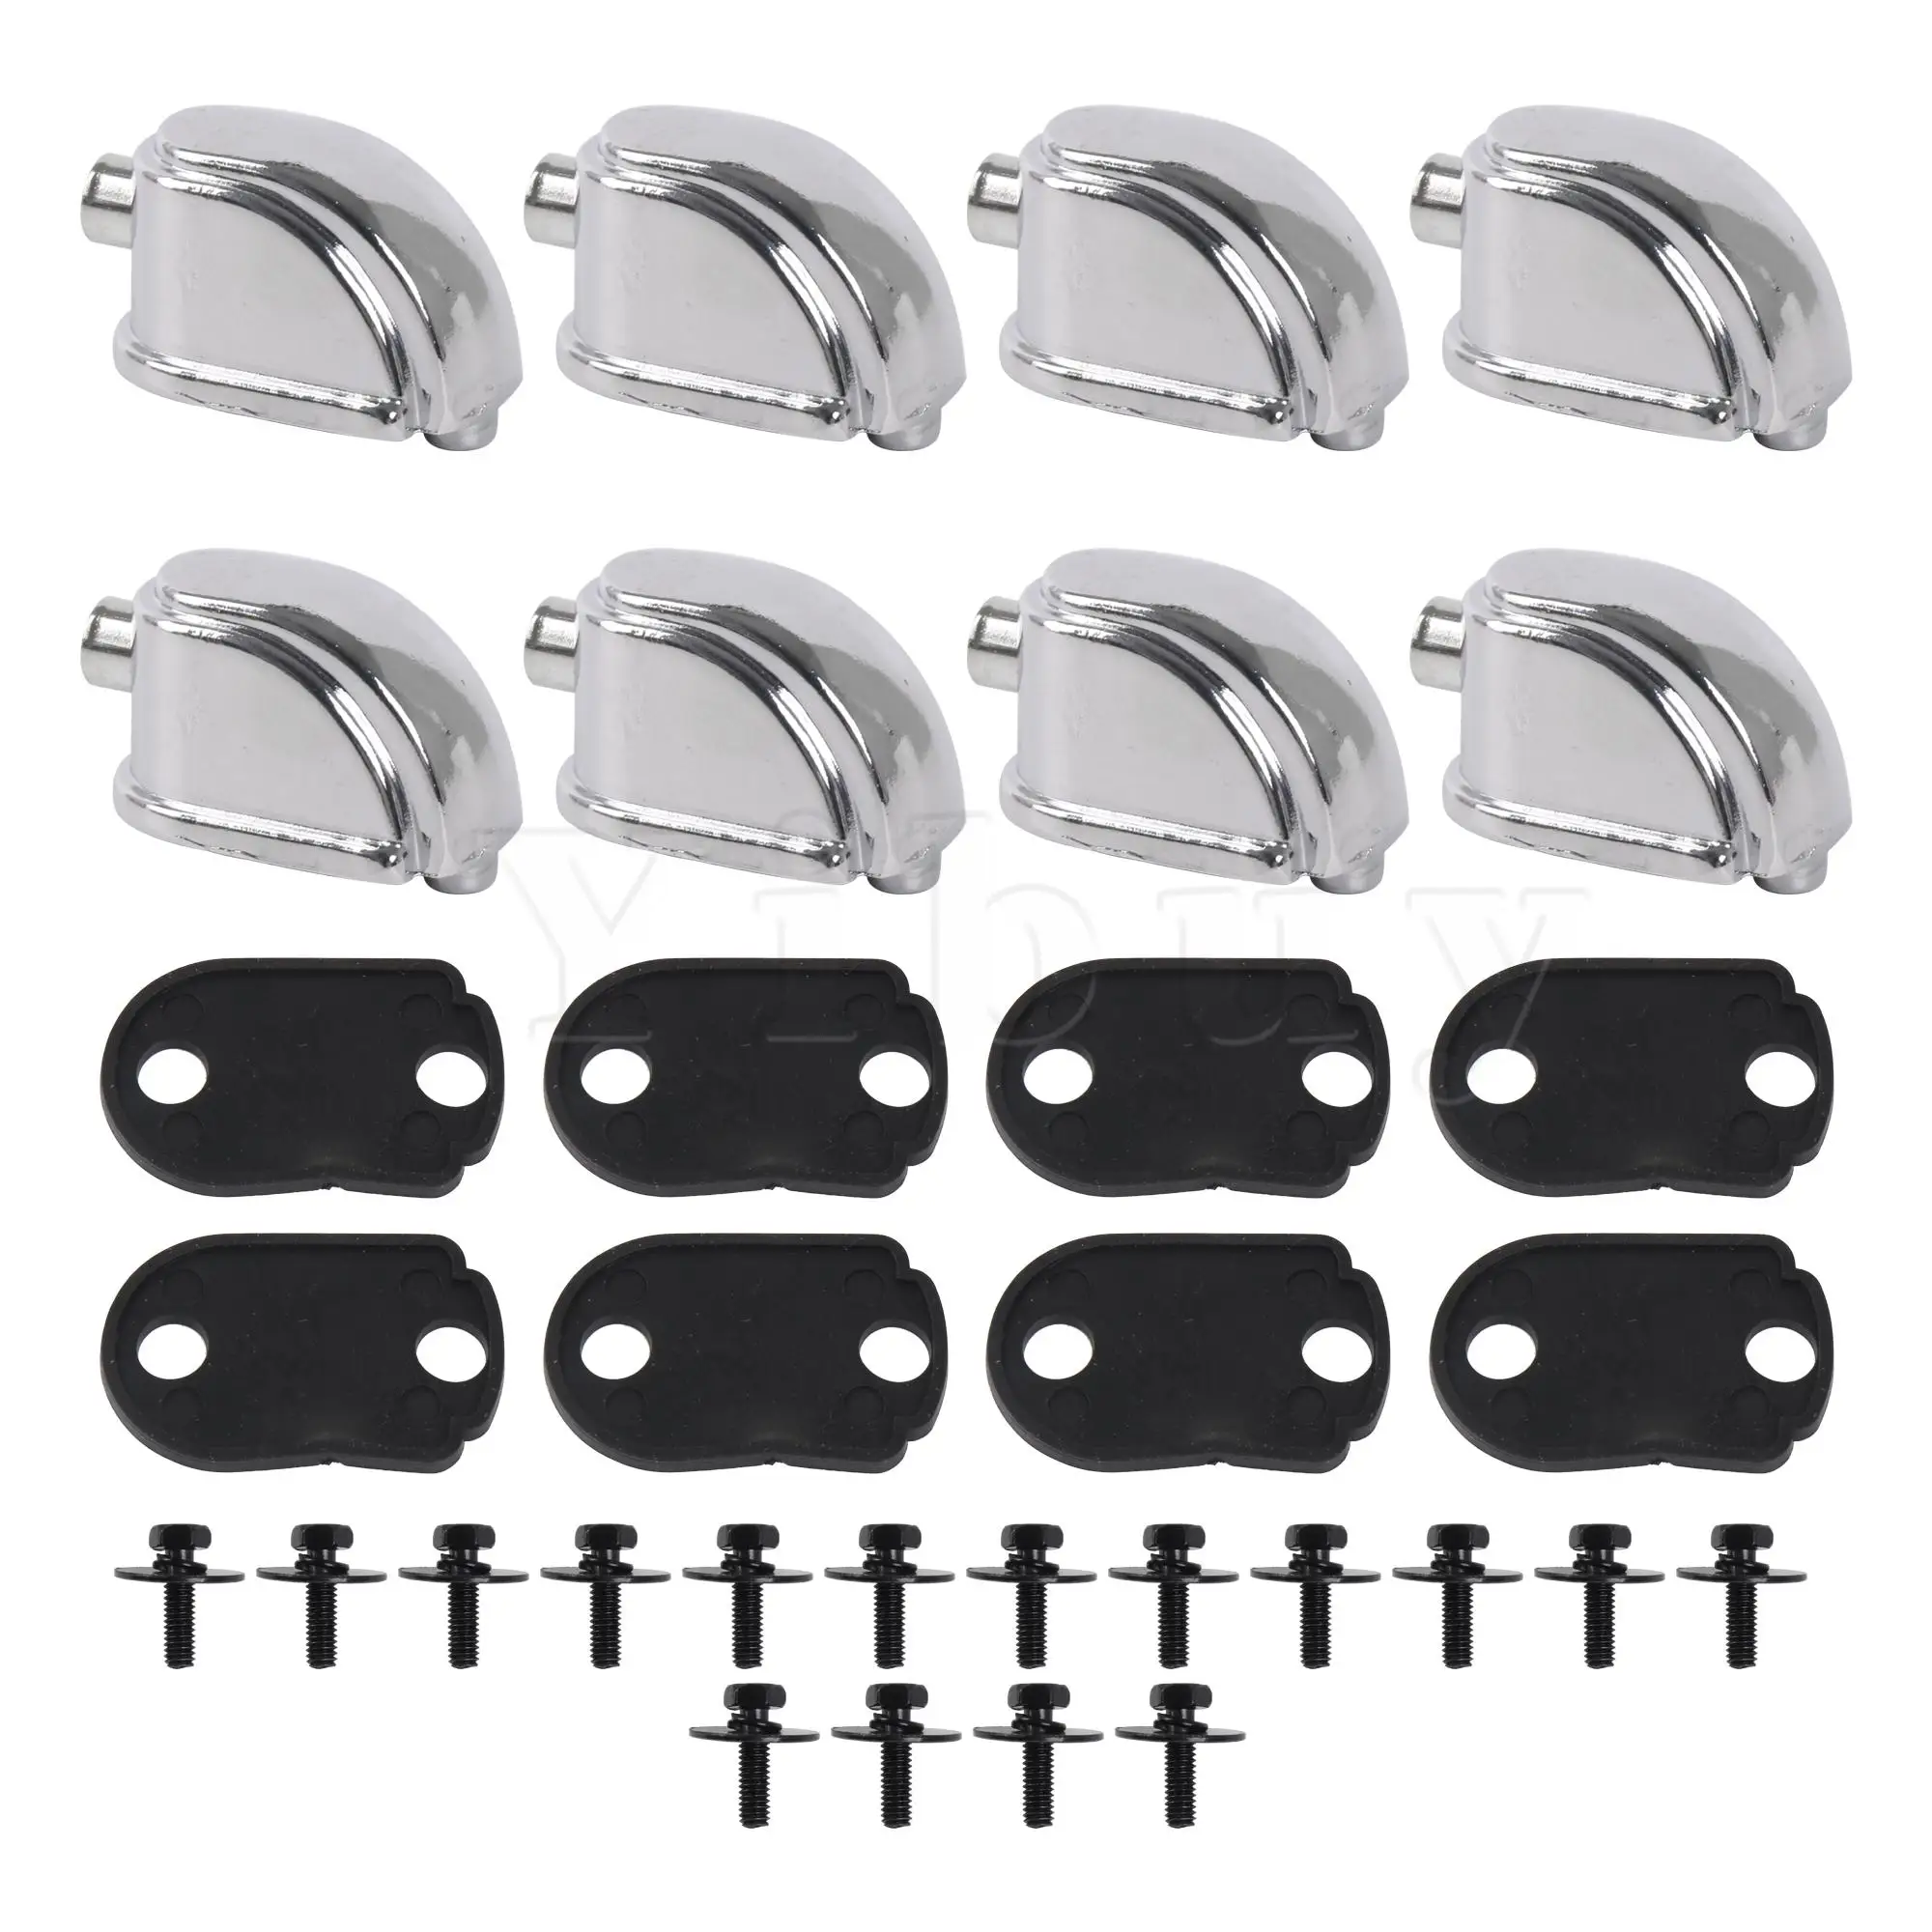 

Yibuy 8 Pieces Snare Drum Lugs 1.02" Hole Spacing for Percussion Accessories